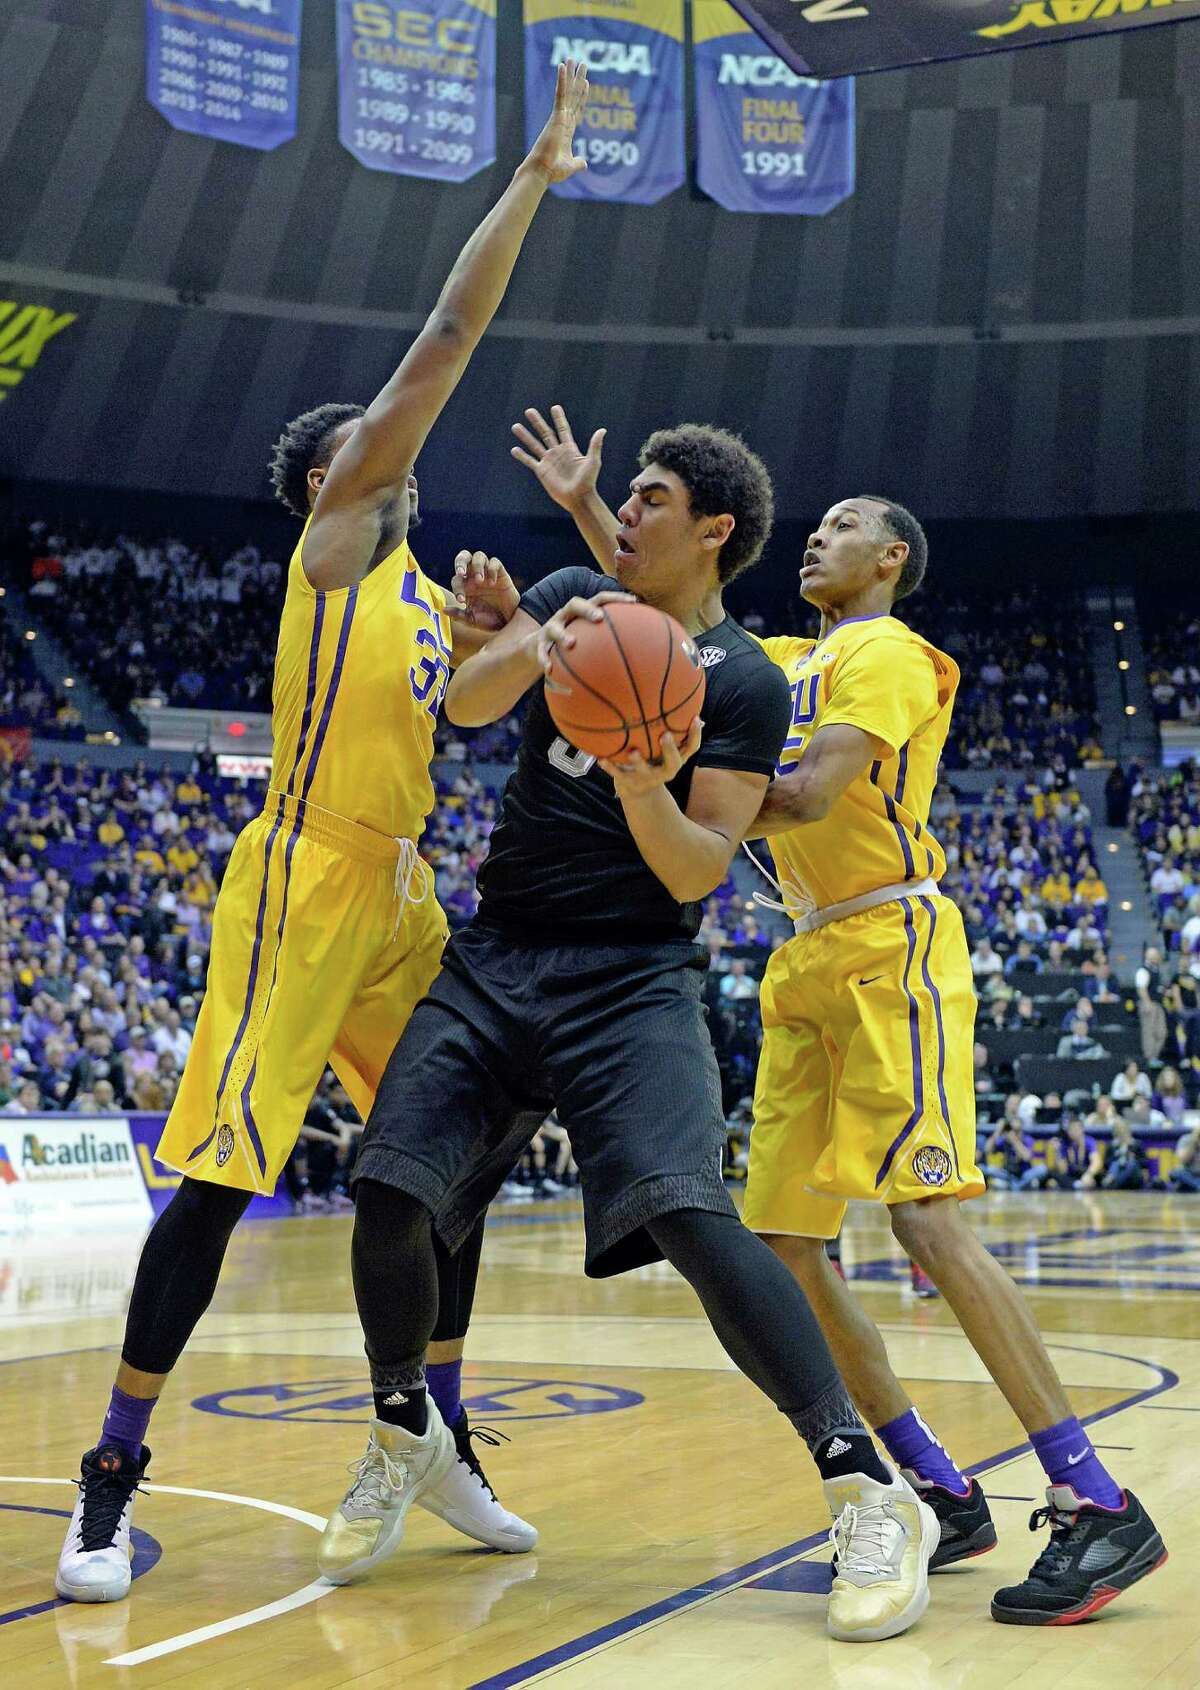 Texas A&M center Tyler Davis (34) is sandwiched by LSU forward Craig Victor II (32) and LSU guard Tim Quarterman, right, in the first half of an NCAA college basketball game in Baton Rouge, La., Saturday, Feb. 13, 2016. LSU won 76-71. (AP Photo/Bill Feig)